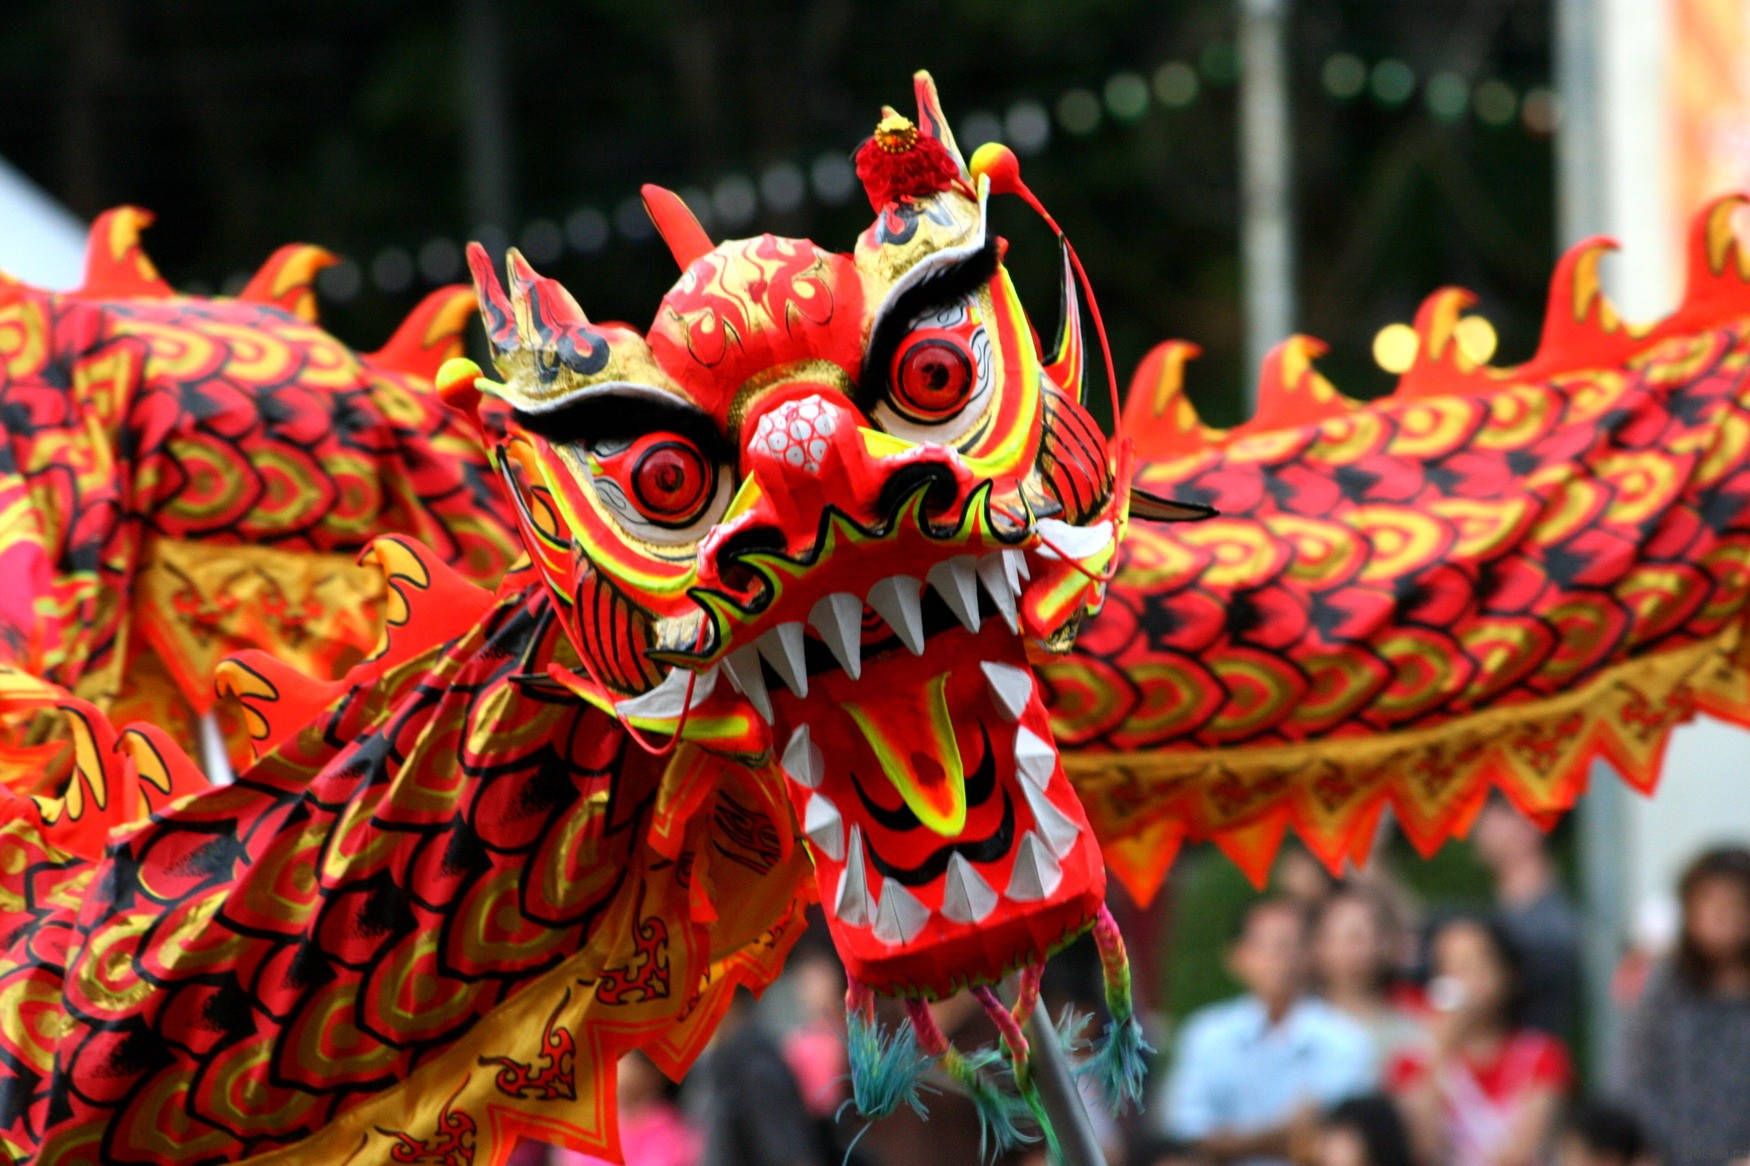 Start off New Year's with a roaring welcome - Chinese New Year's Dragon. Wallpaper